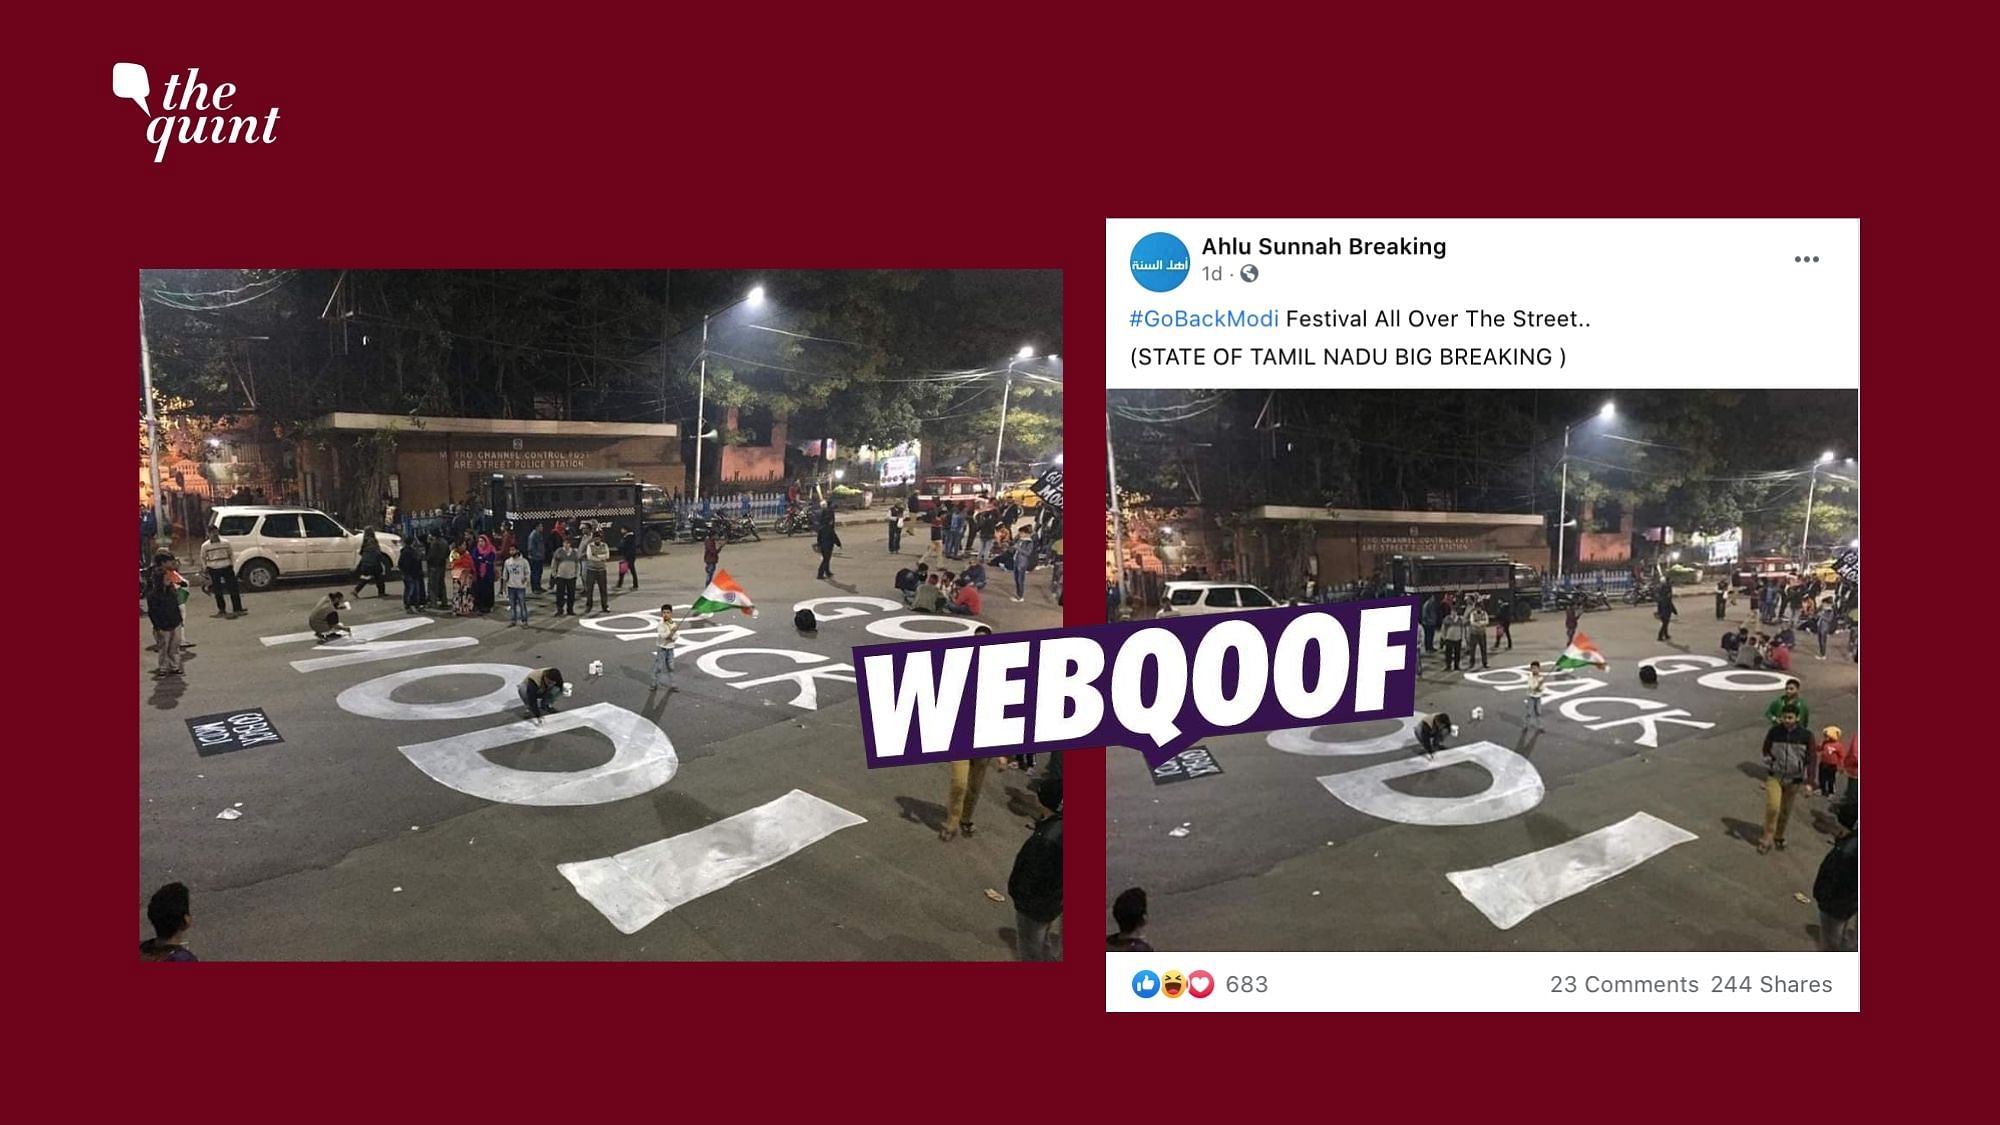 The image dates back to January 2020 when PM Modi had visited the state of West Bengal and anti-CAA protests erupted in Kolkata’s Esplanade area.